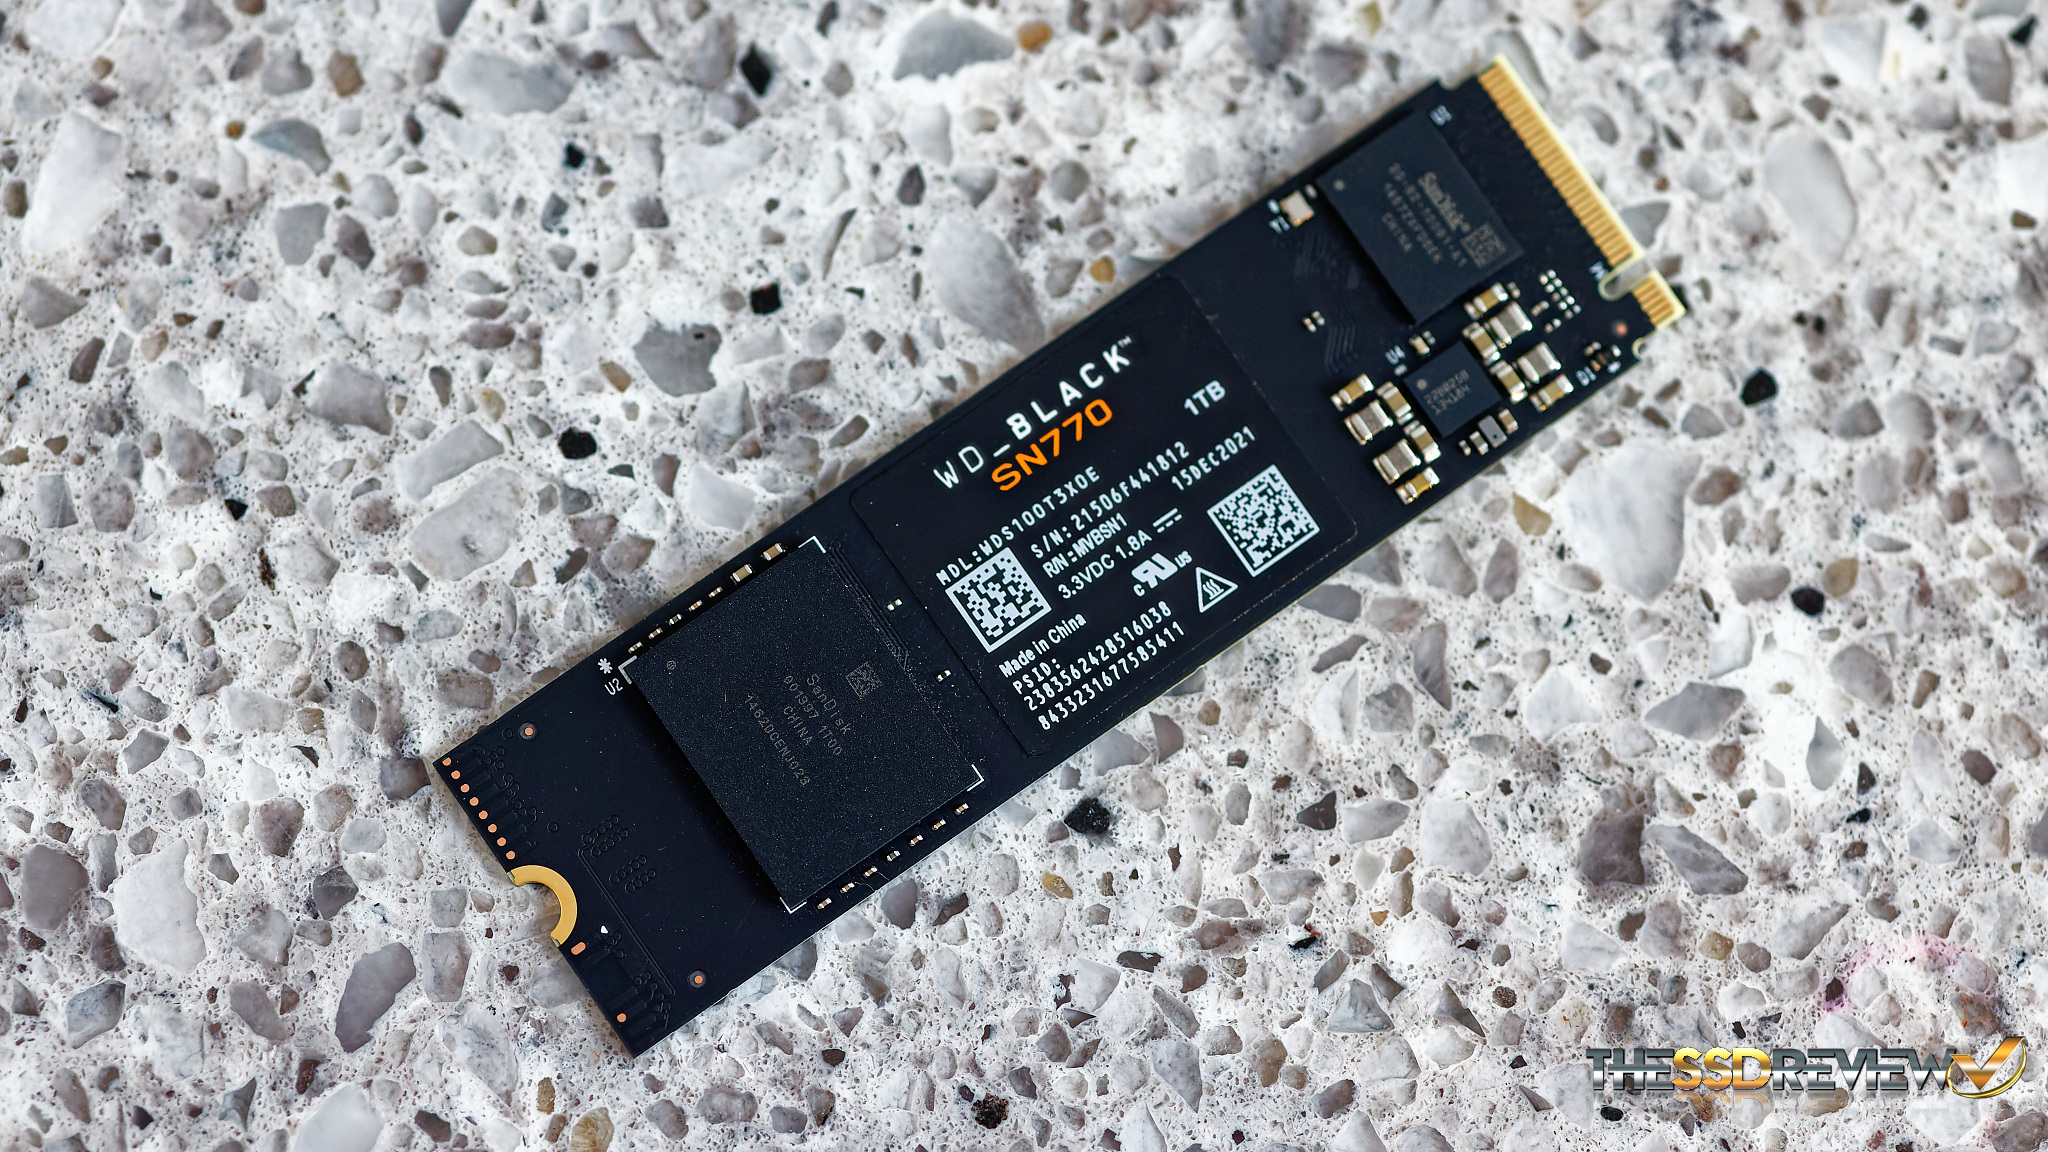 WD Black SN770 NVMe SSD review: Speedy and cheap - Can Buy or Not